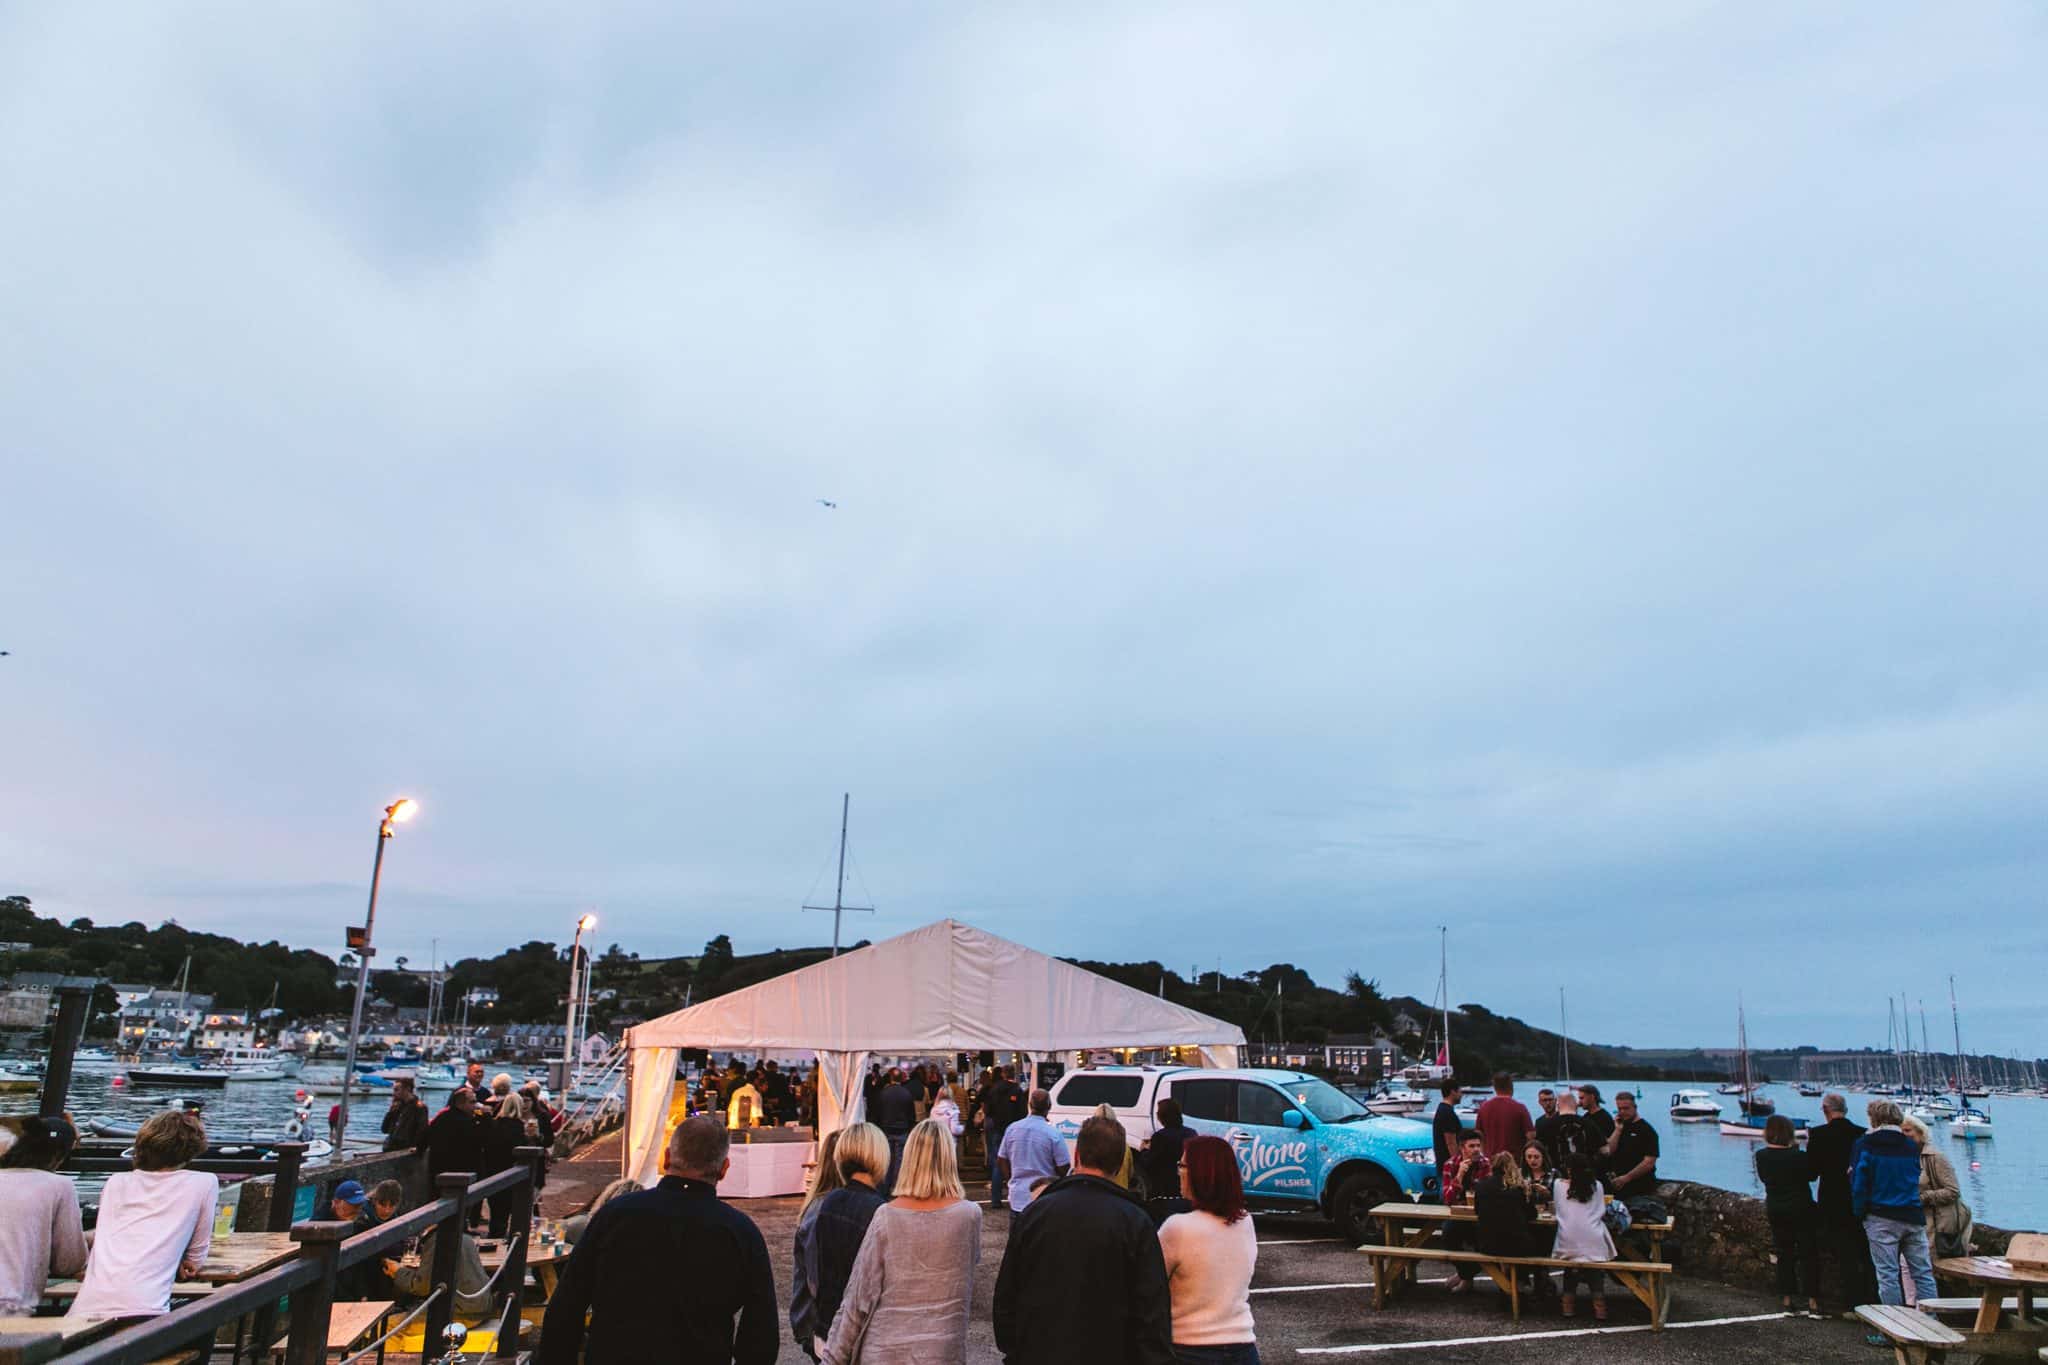 falmouth-week-at-the-working-boat-pub-live-music-events-falmouth-cornwall (47 of 114)